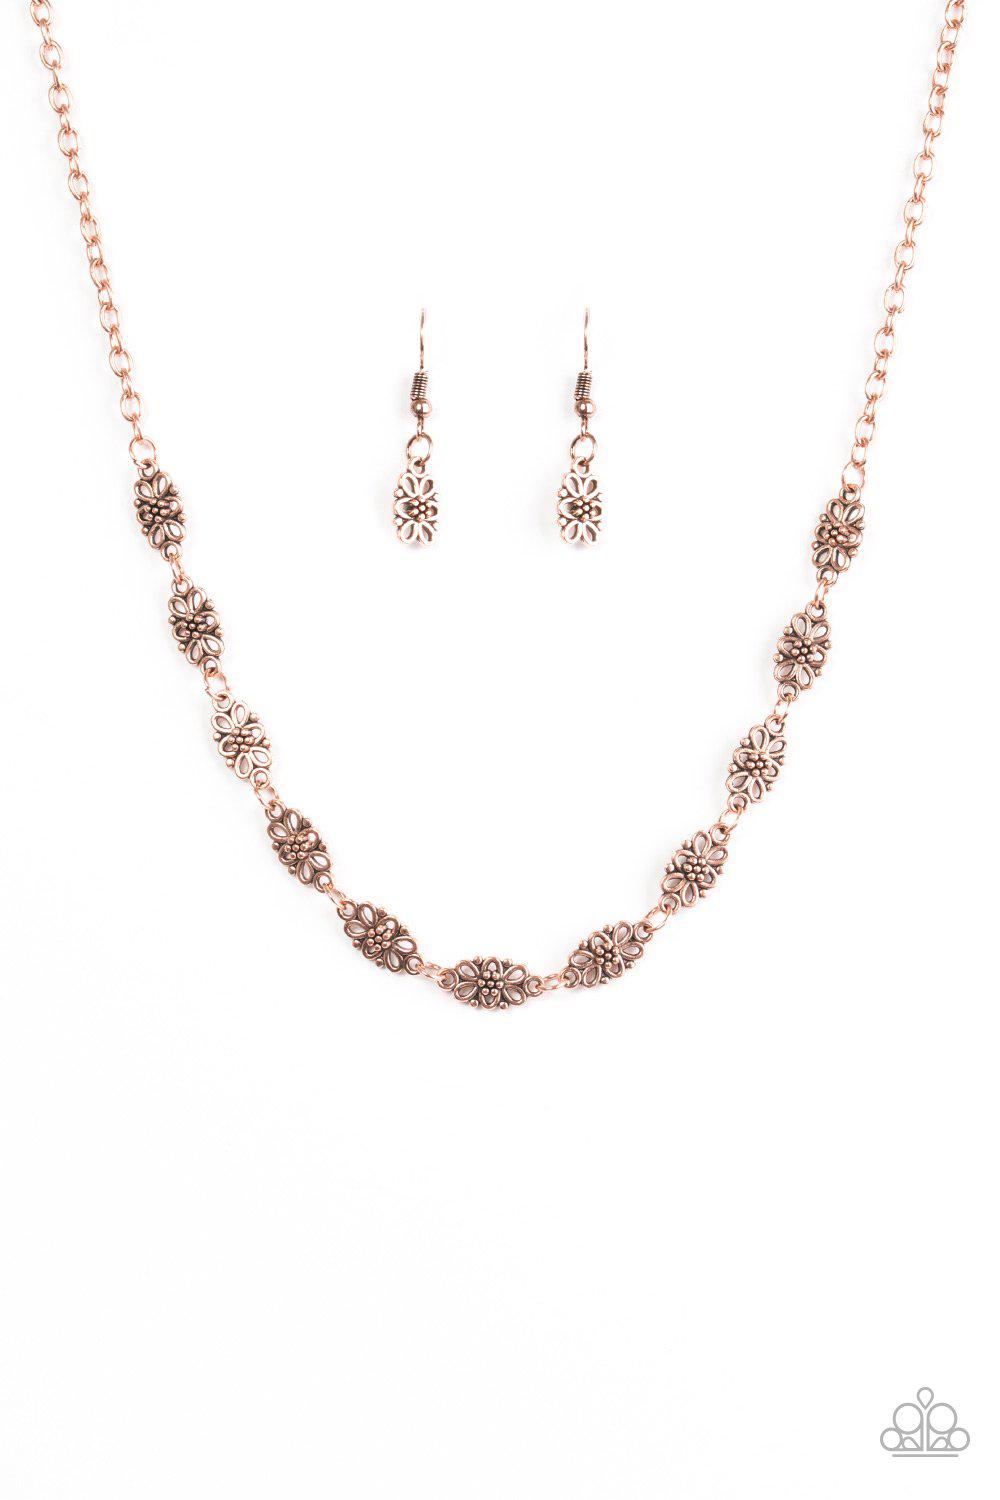 Daisy Dream Copper Flower Necklace - Paparazzi Accessories-CarasShop.com - $5 Jewelry by Cara Jewels